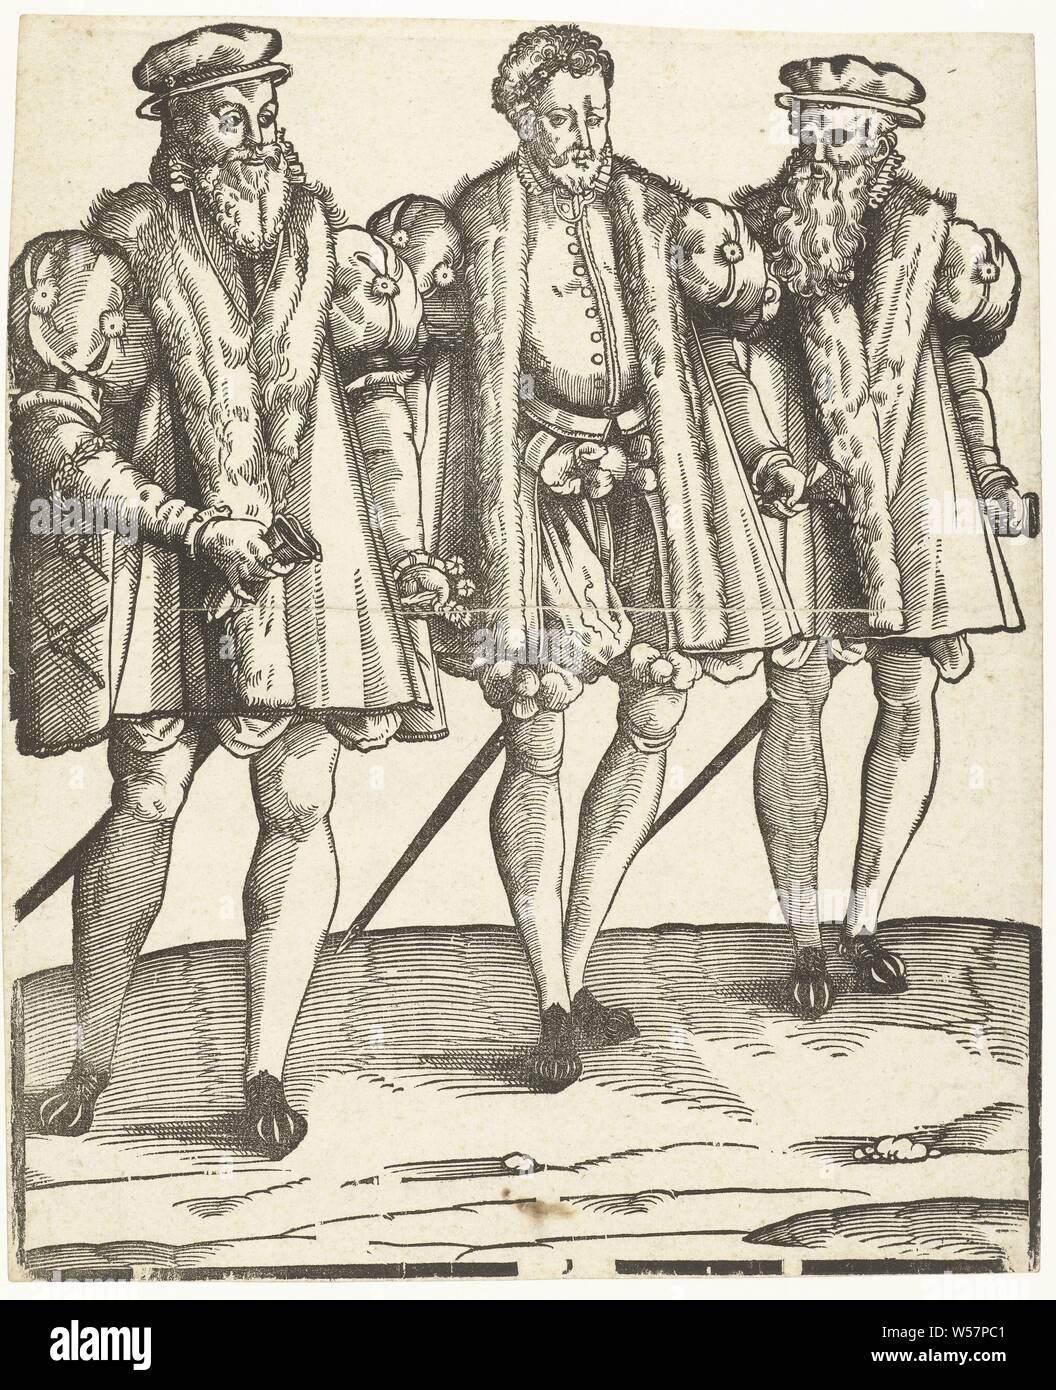 Portrait of Gaspard, Francois and Odet de Coligny, Odet, Cardinal of Châtillon (1517-1571), Gaspard, Admiral of France and father of Louise de Coligny (1519-1572) and Francois, general of infantry (1521-1569) are dressed according to Spanish fashion., clothing for the upper part of the body (men's clothes), clothing for the upper part of the body (fur used for clothes), trousers, breeches, etc (BREECHES) (men's clothes), gloves, mittens, etc. (men's clothes), shoes, sandals (men's clothes), head-gear: men's clothes, clothing for the upper part of the body (DOUBLET) ( men's clothes), coat (Men' Stock Photo